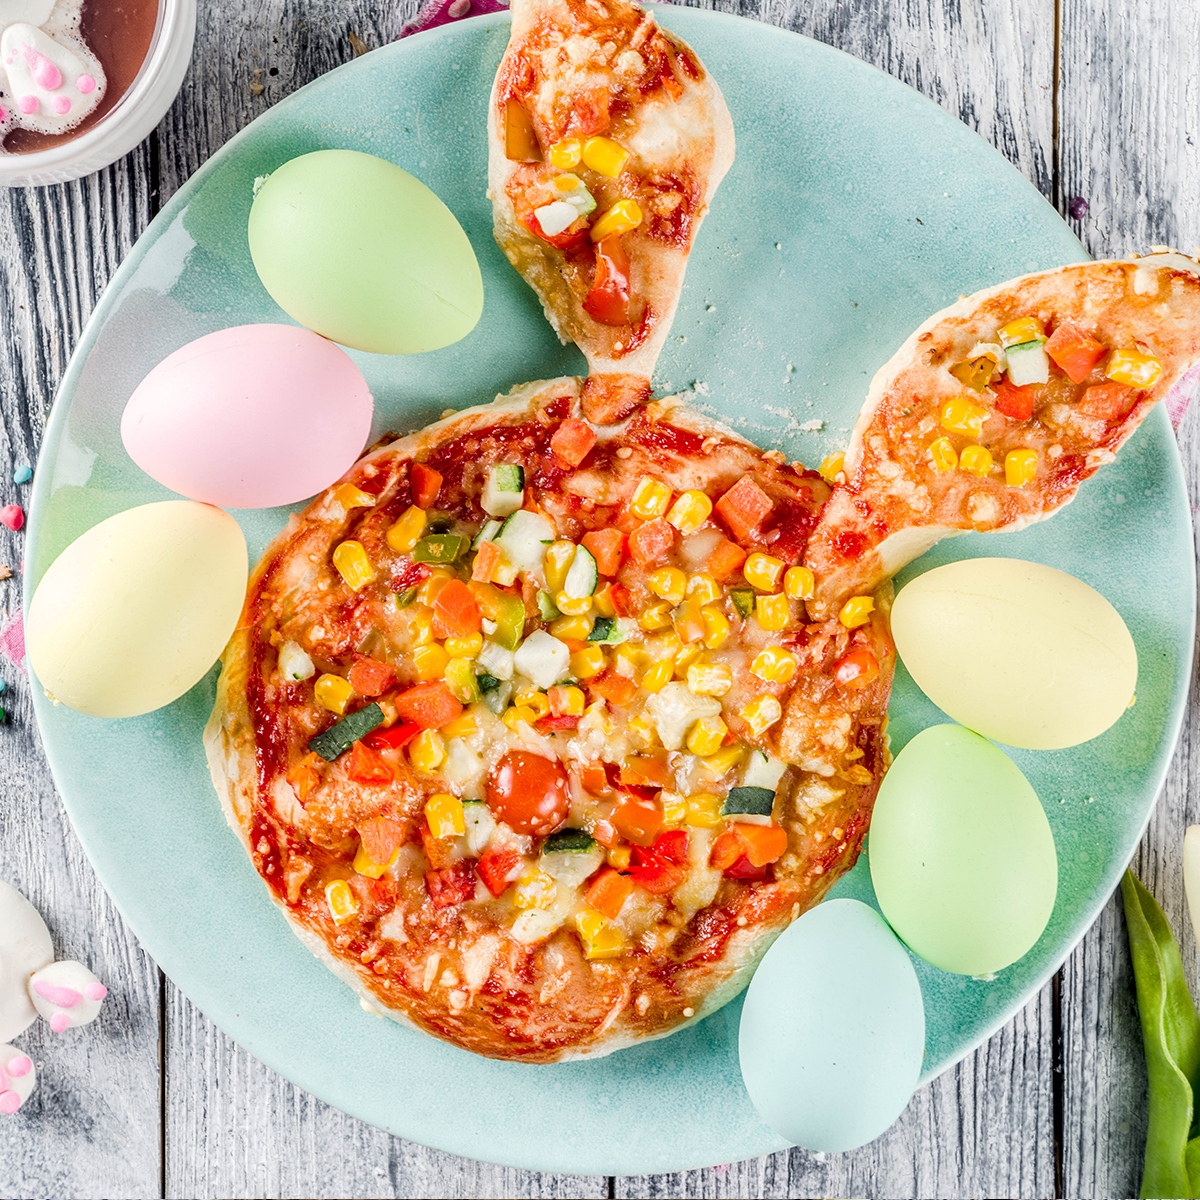 Easter meal ideas for kids